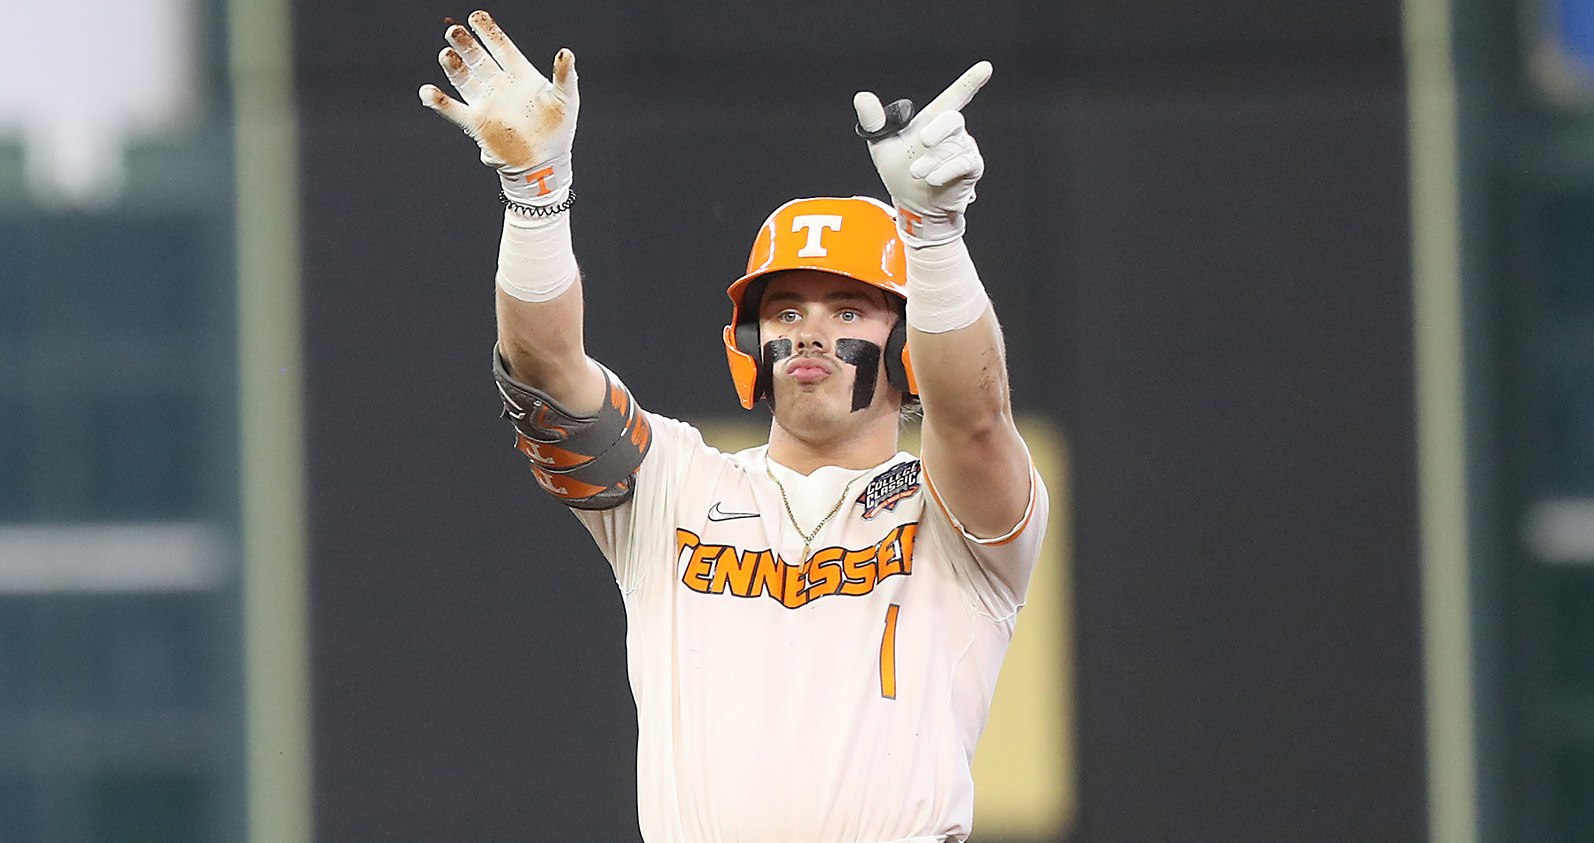 Vols' Drew Gilbert selected in first round of 2022 MLB Draft, Sports